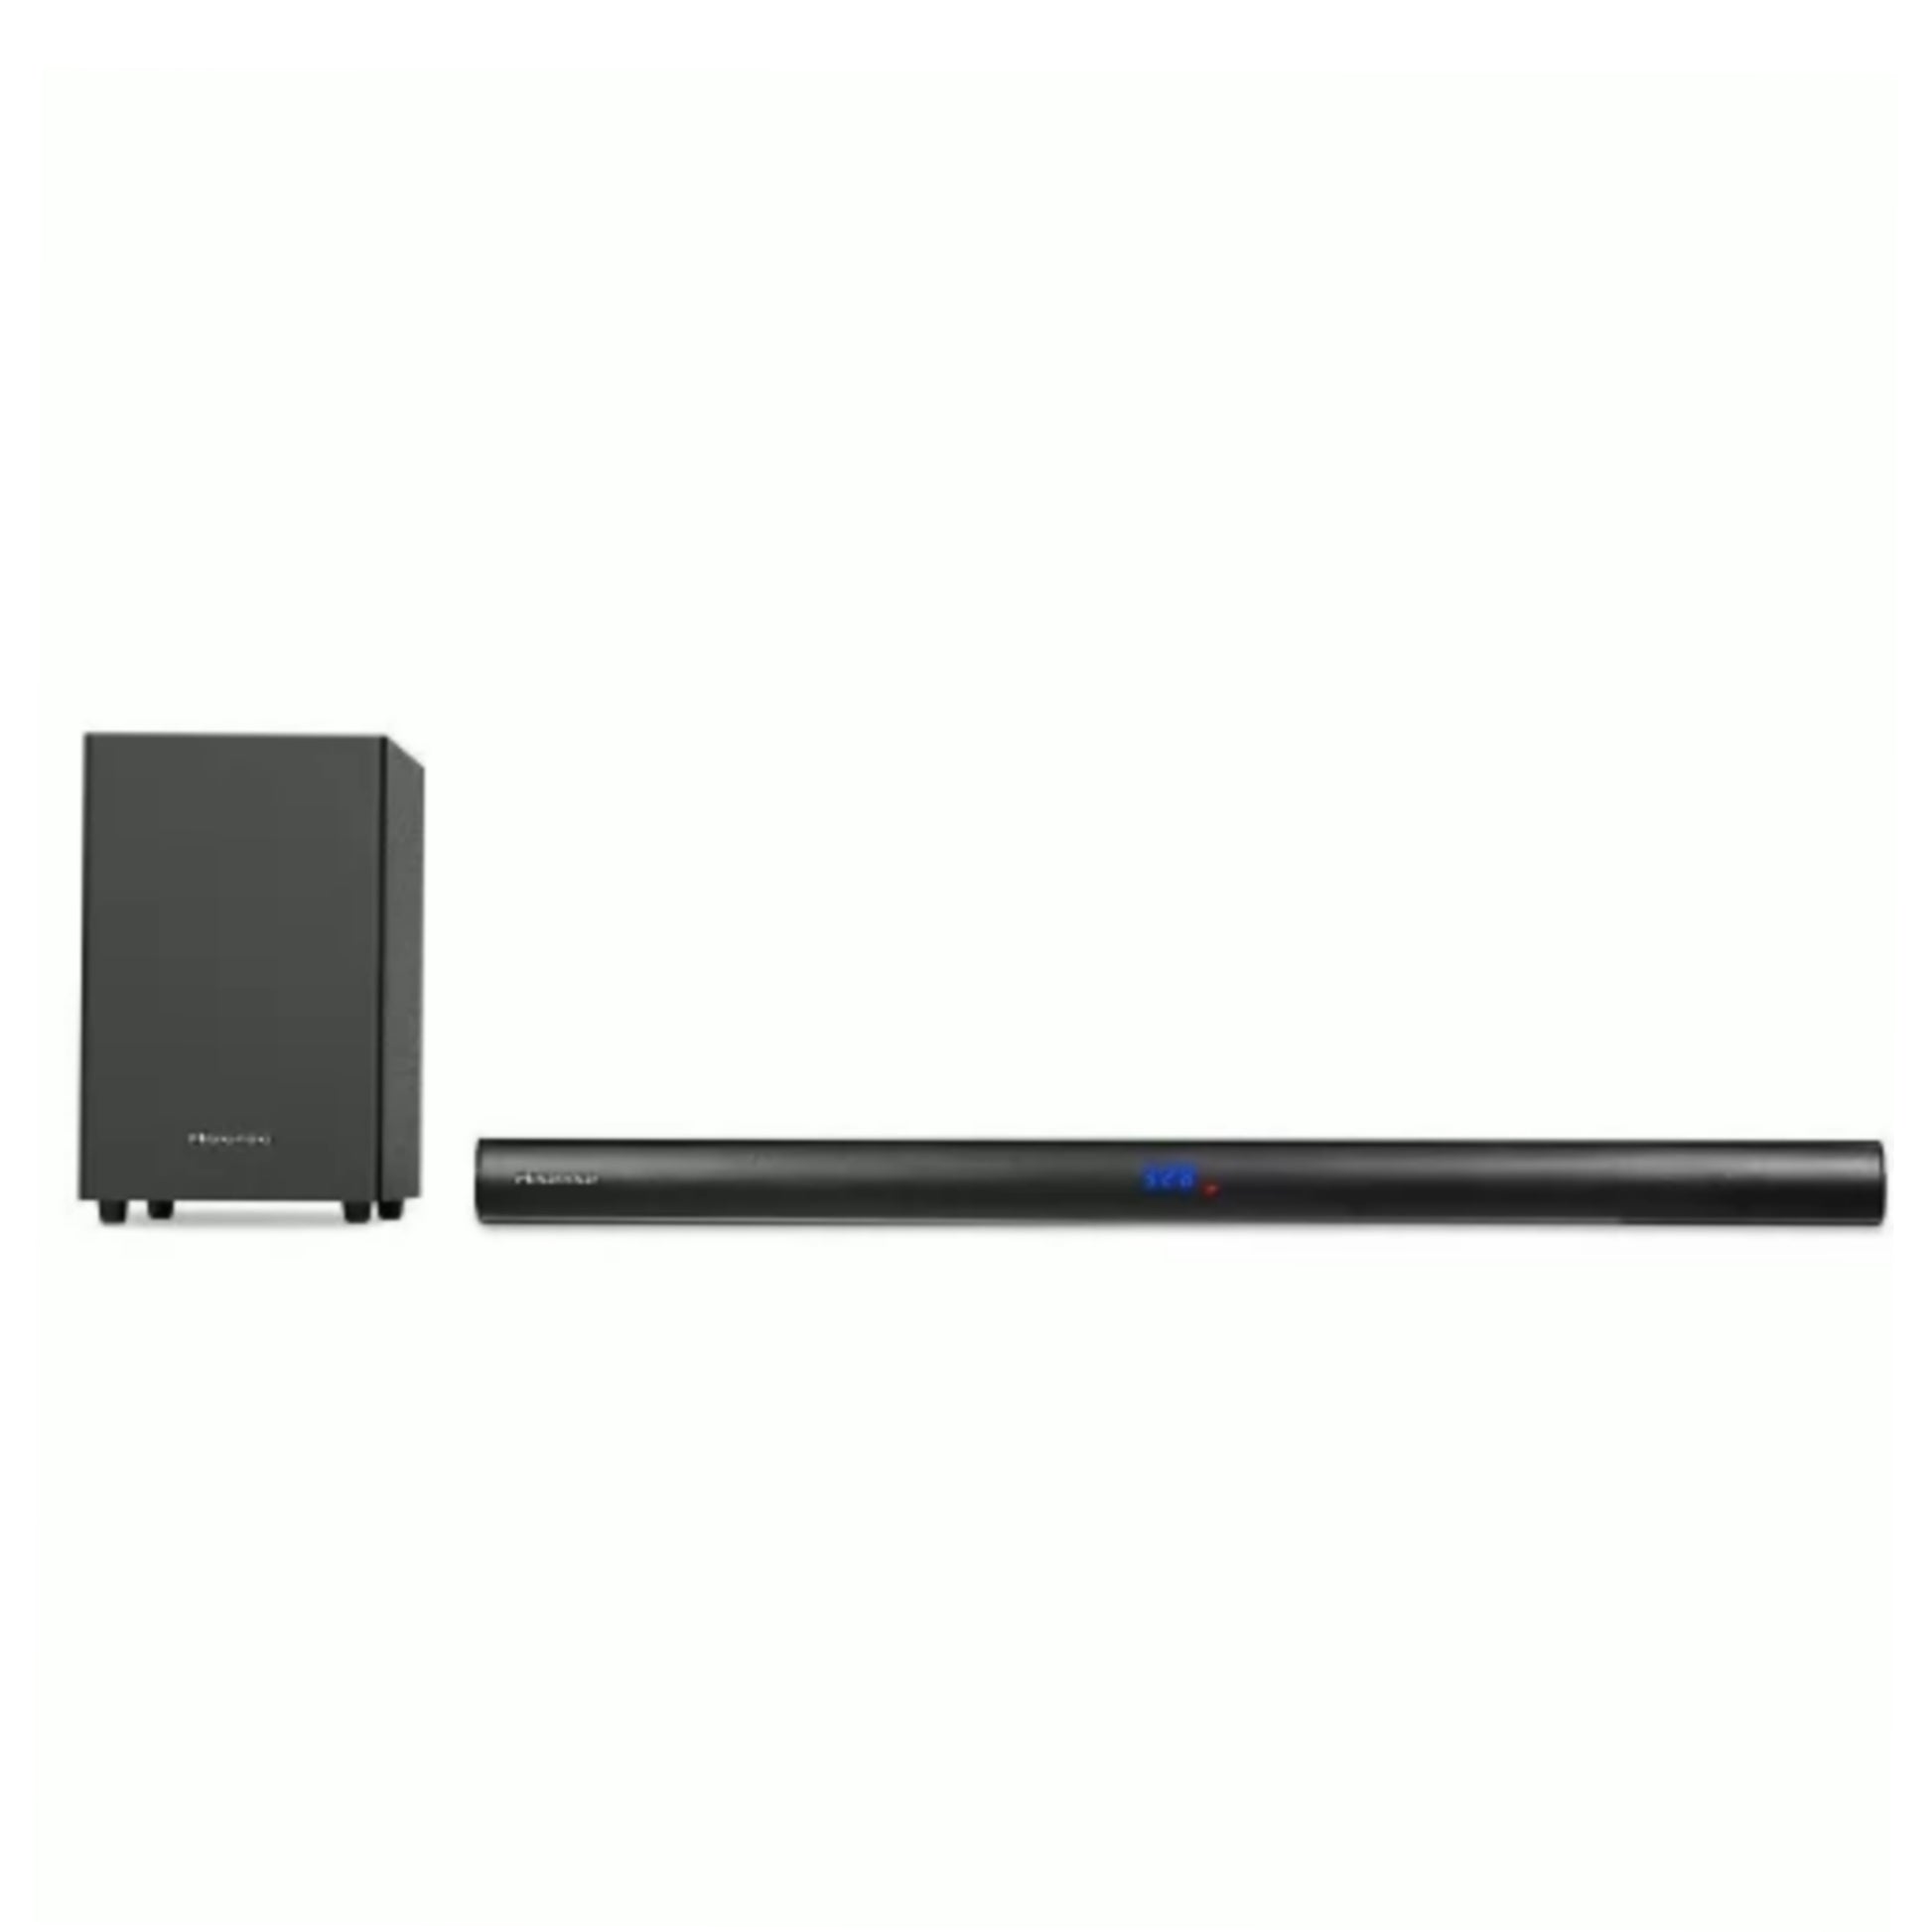 Brand new Hisense AUD212 2.1 Channel Sound Bar with USB and Bluetooth Support